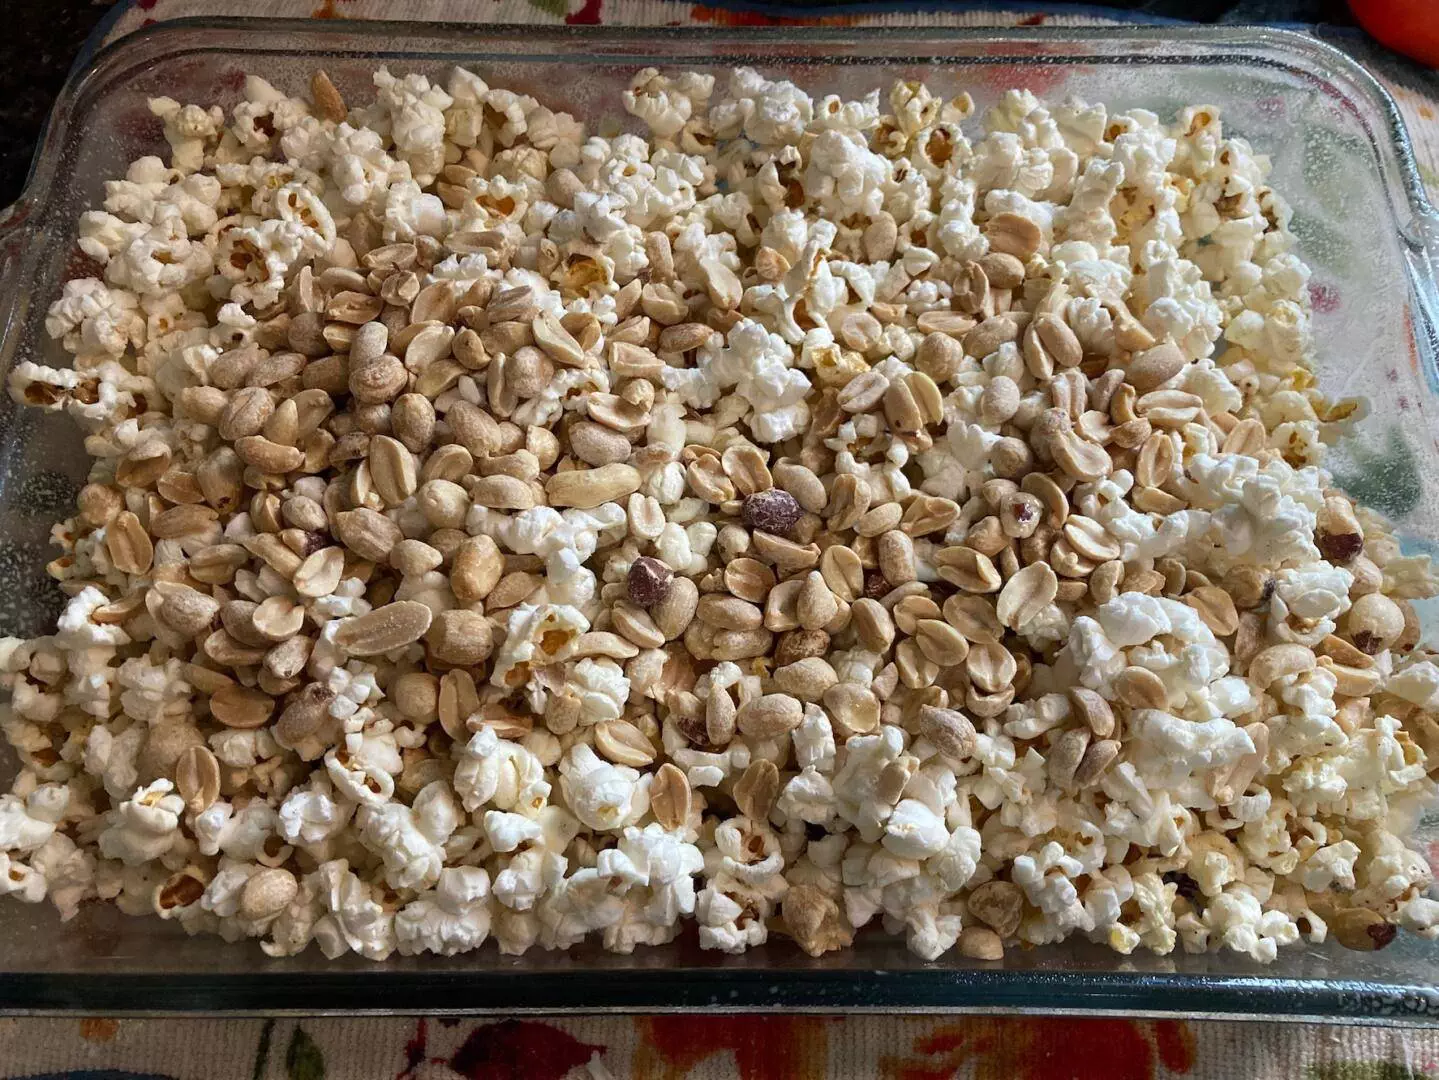 Homemade Cracker Jack from Out of the Box Baking.com